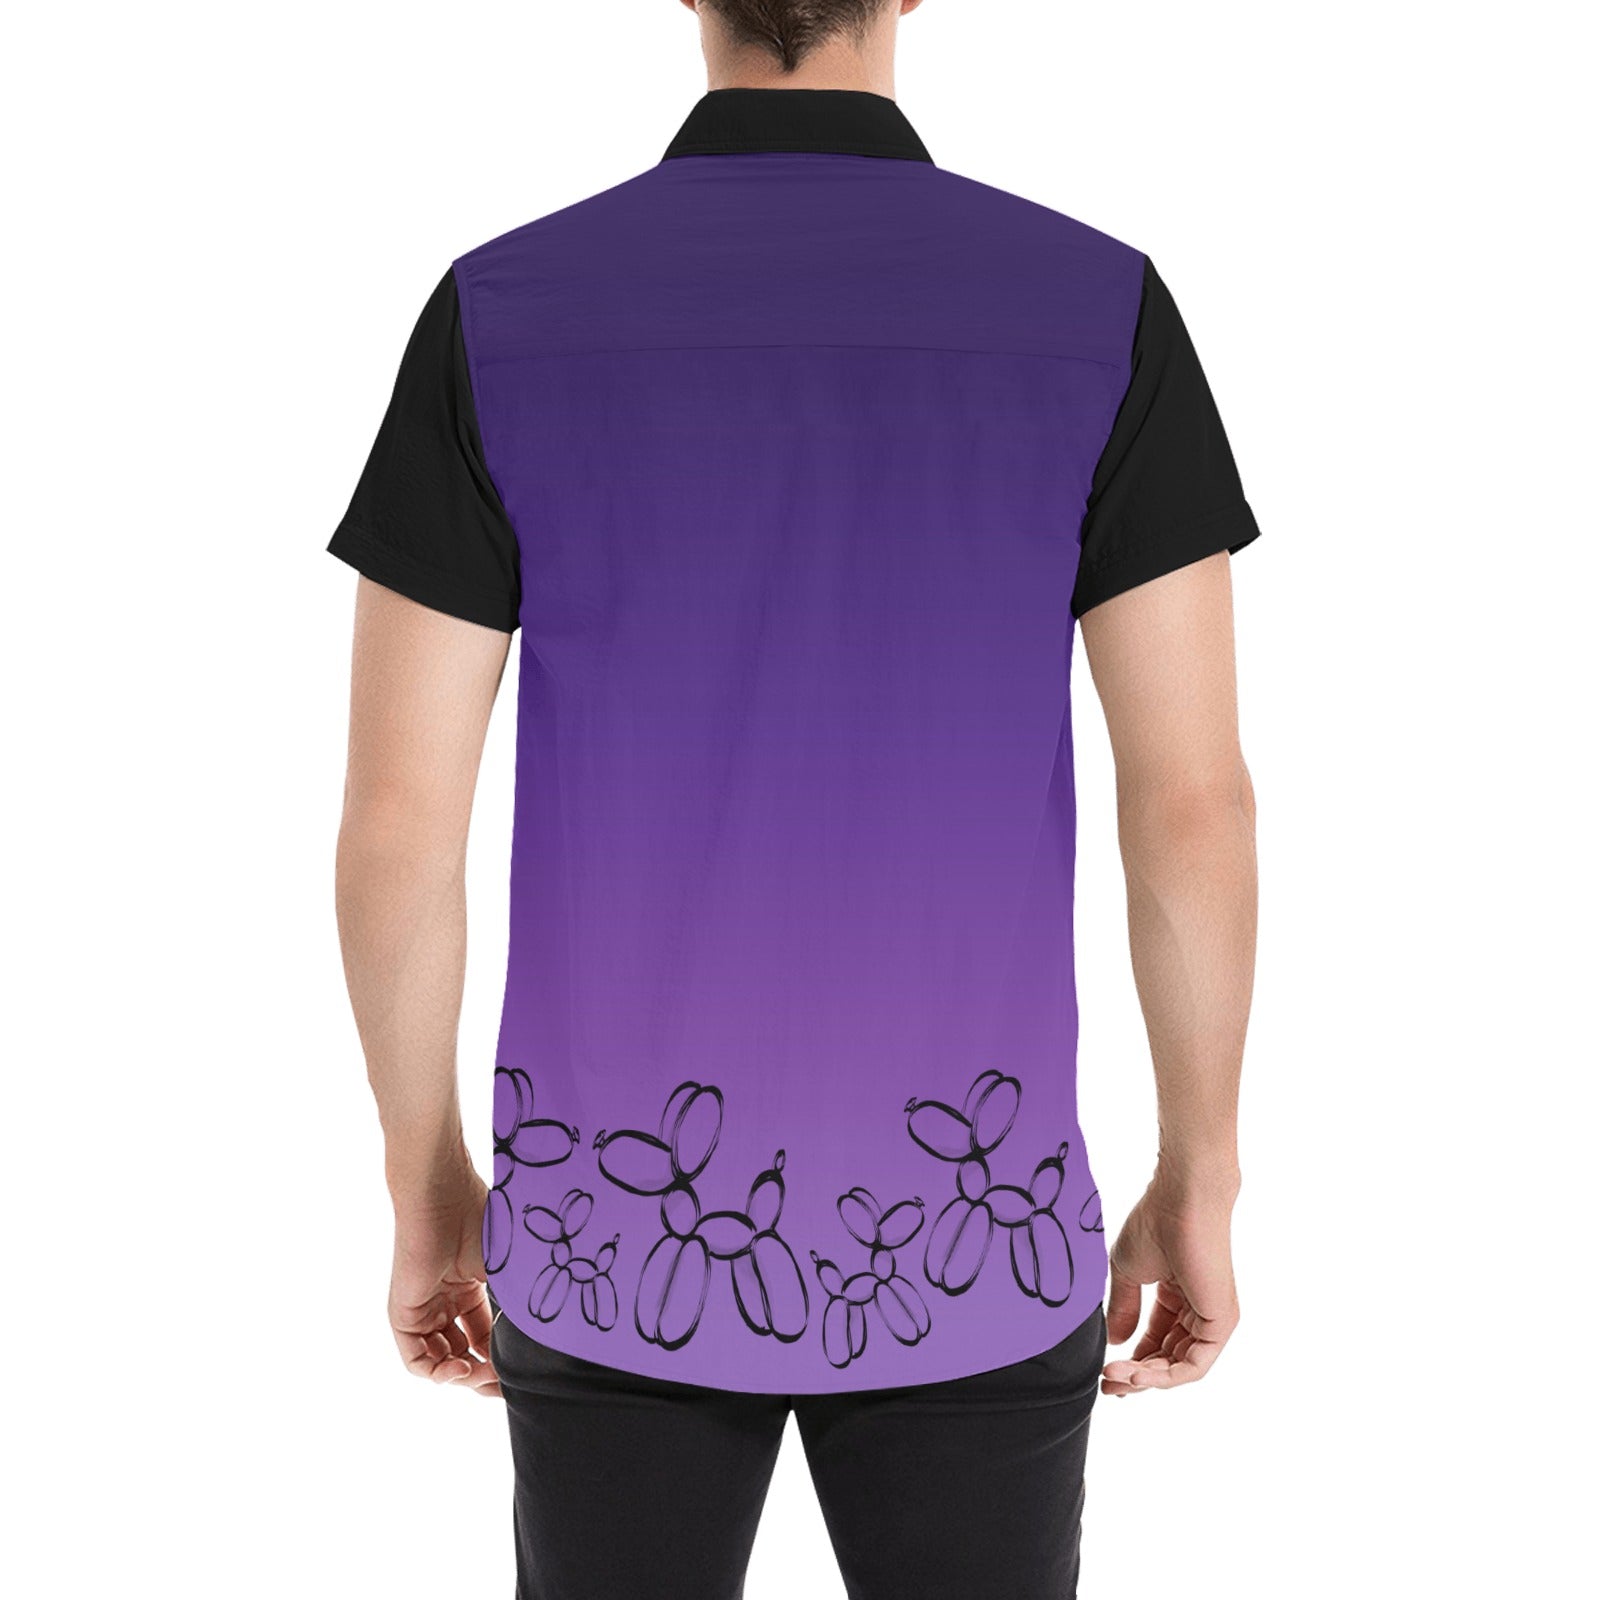 Purple bowling shirt with Balloon Dogs